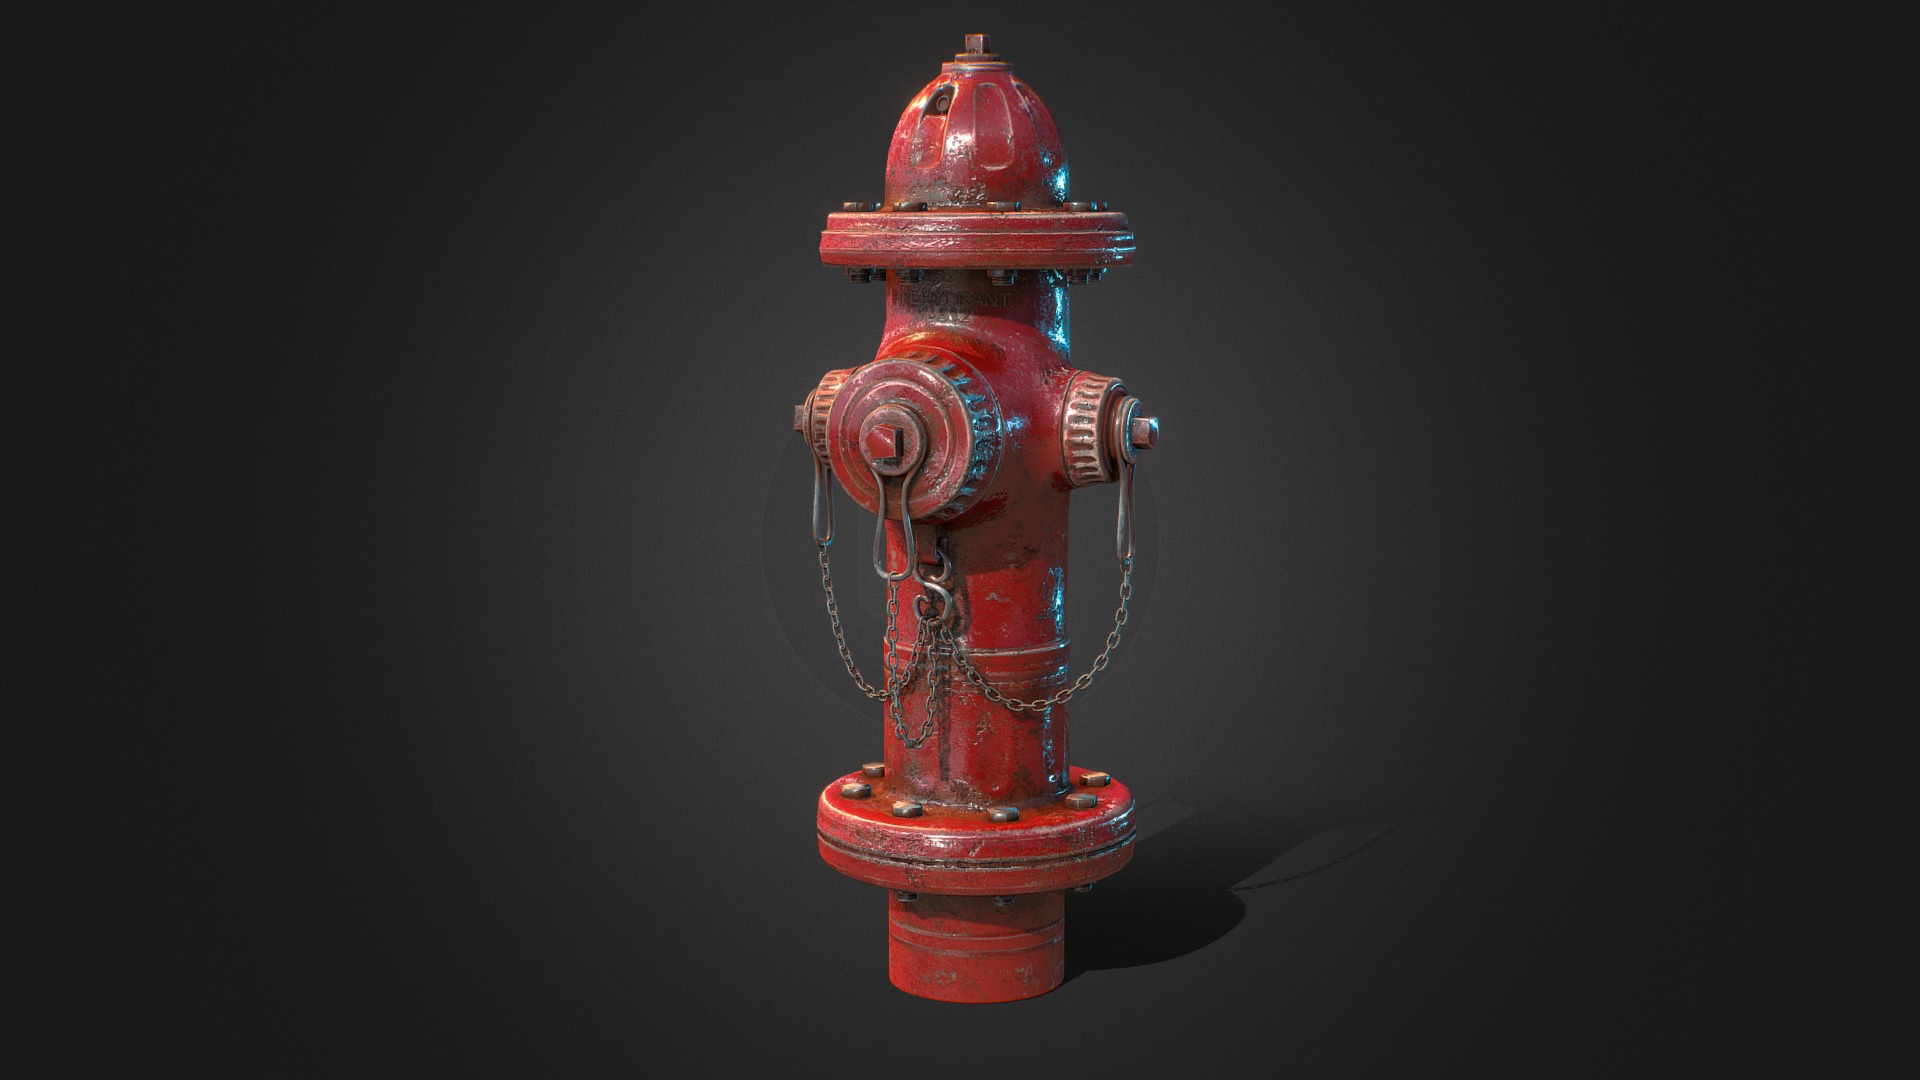 3D model Fire hydrant PBR - This is a 3D model of the Fire hydrant PBR. The 3D model is about a red fire hydrant.